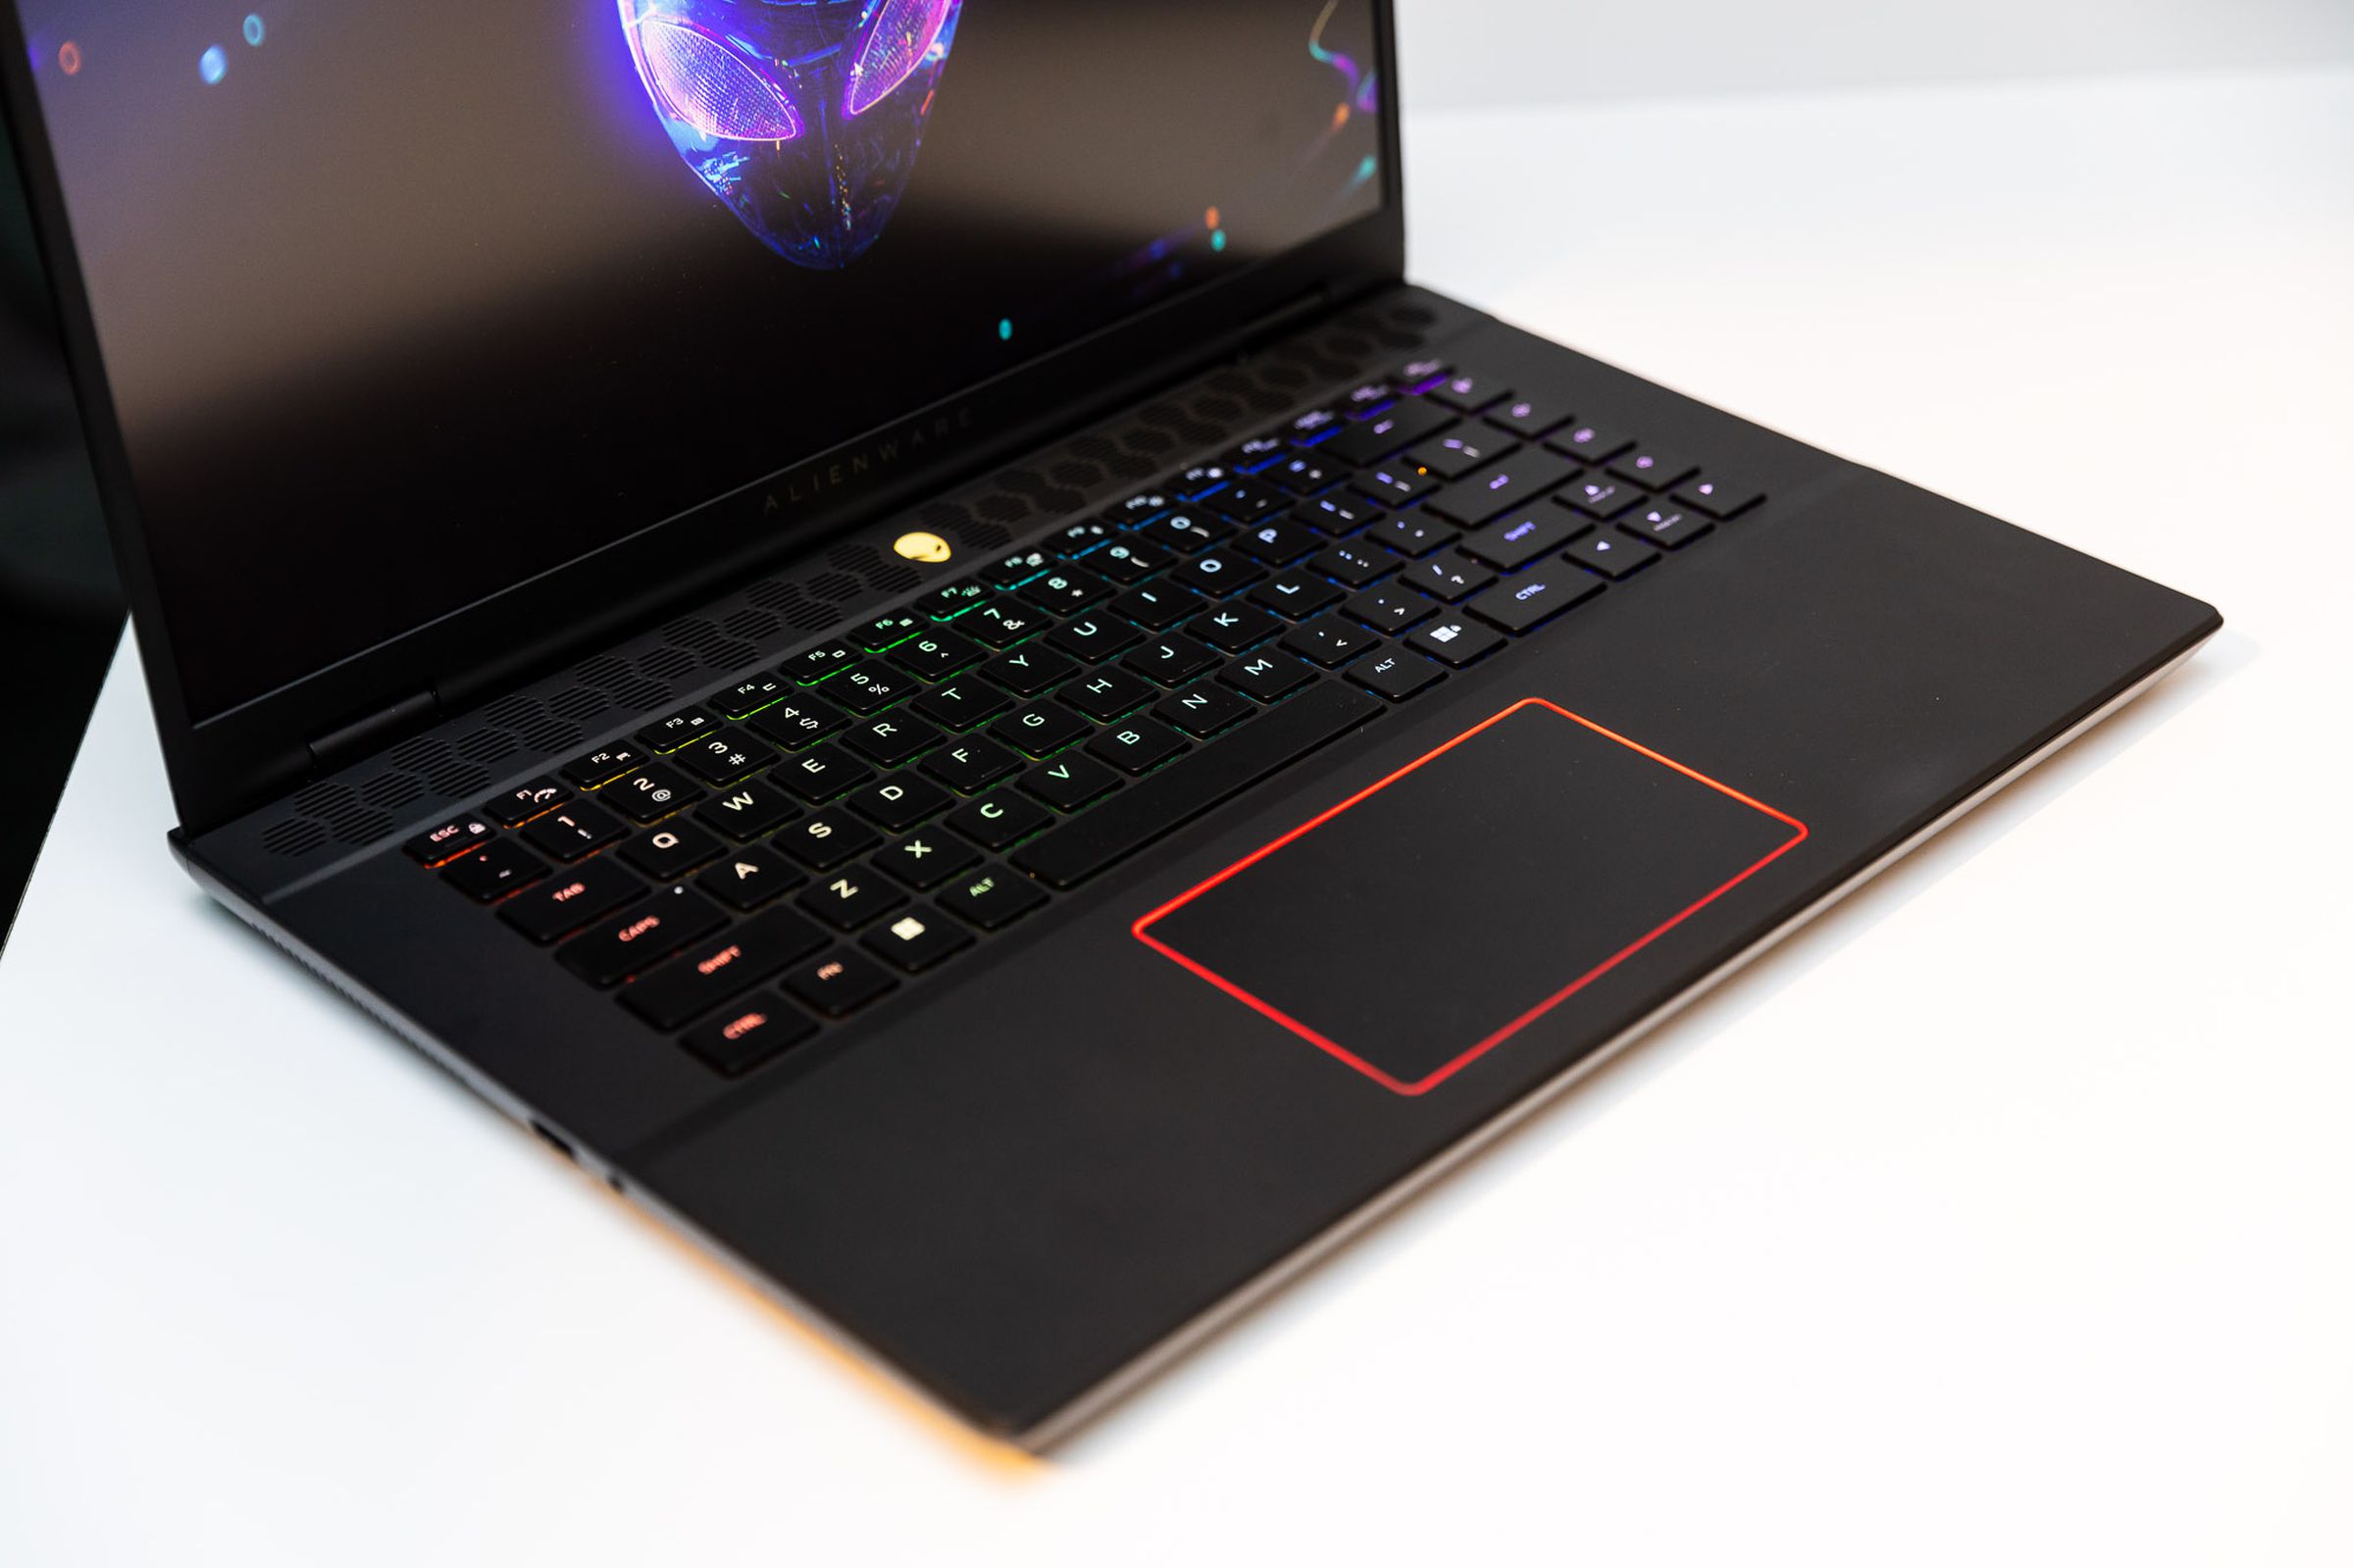 A picture of an MSI laptop with a red LED lining the touchpad.